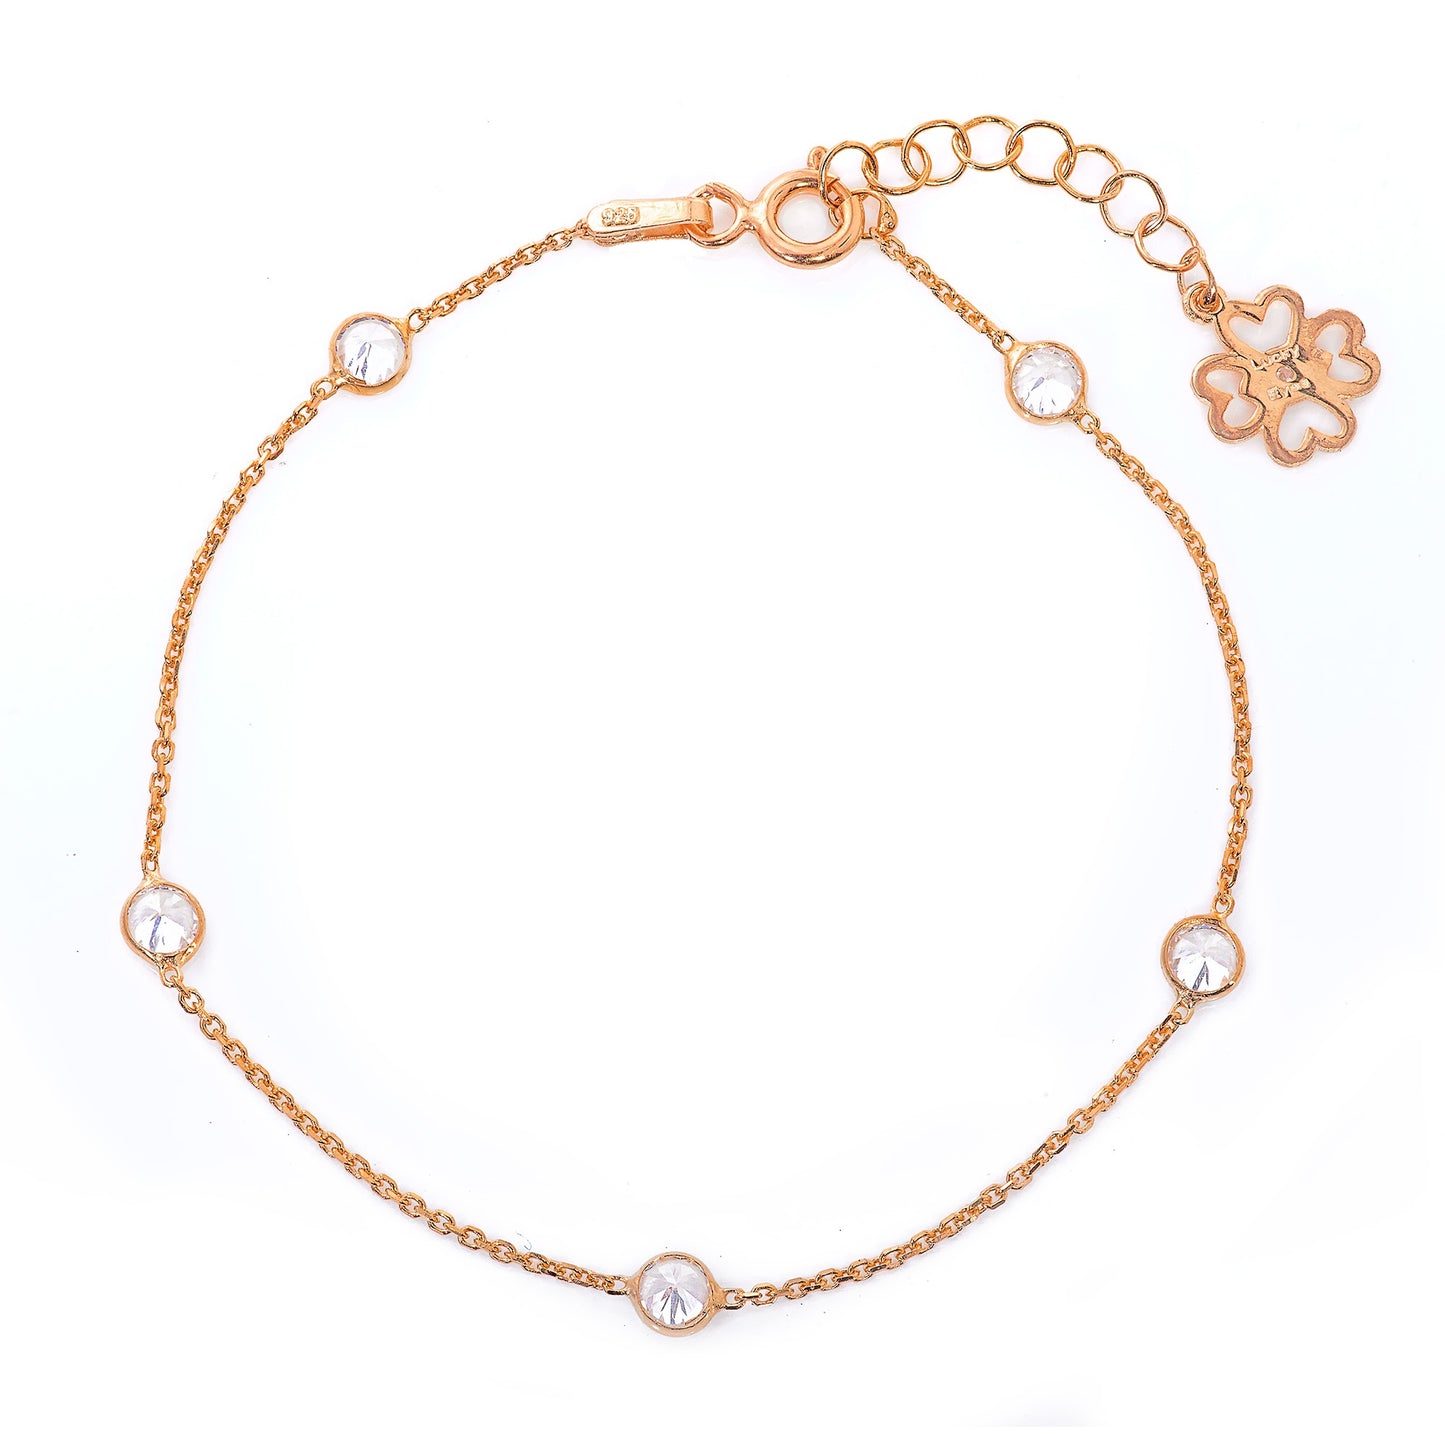 Mayfair Bracelet with 3.5mm Small Crystals on a Single Chain - Exclusive to Fenwick of Bond Street